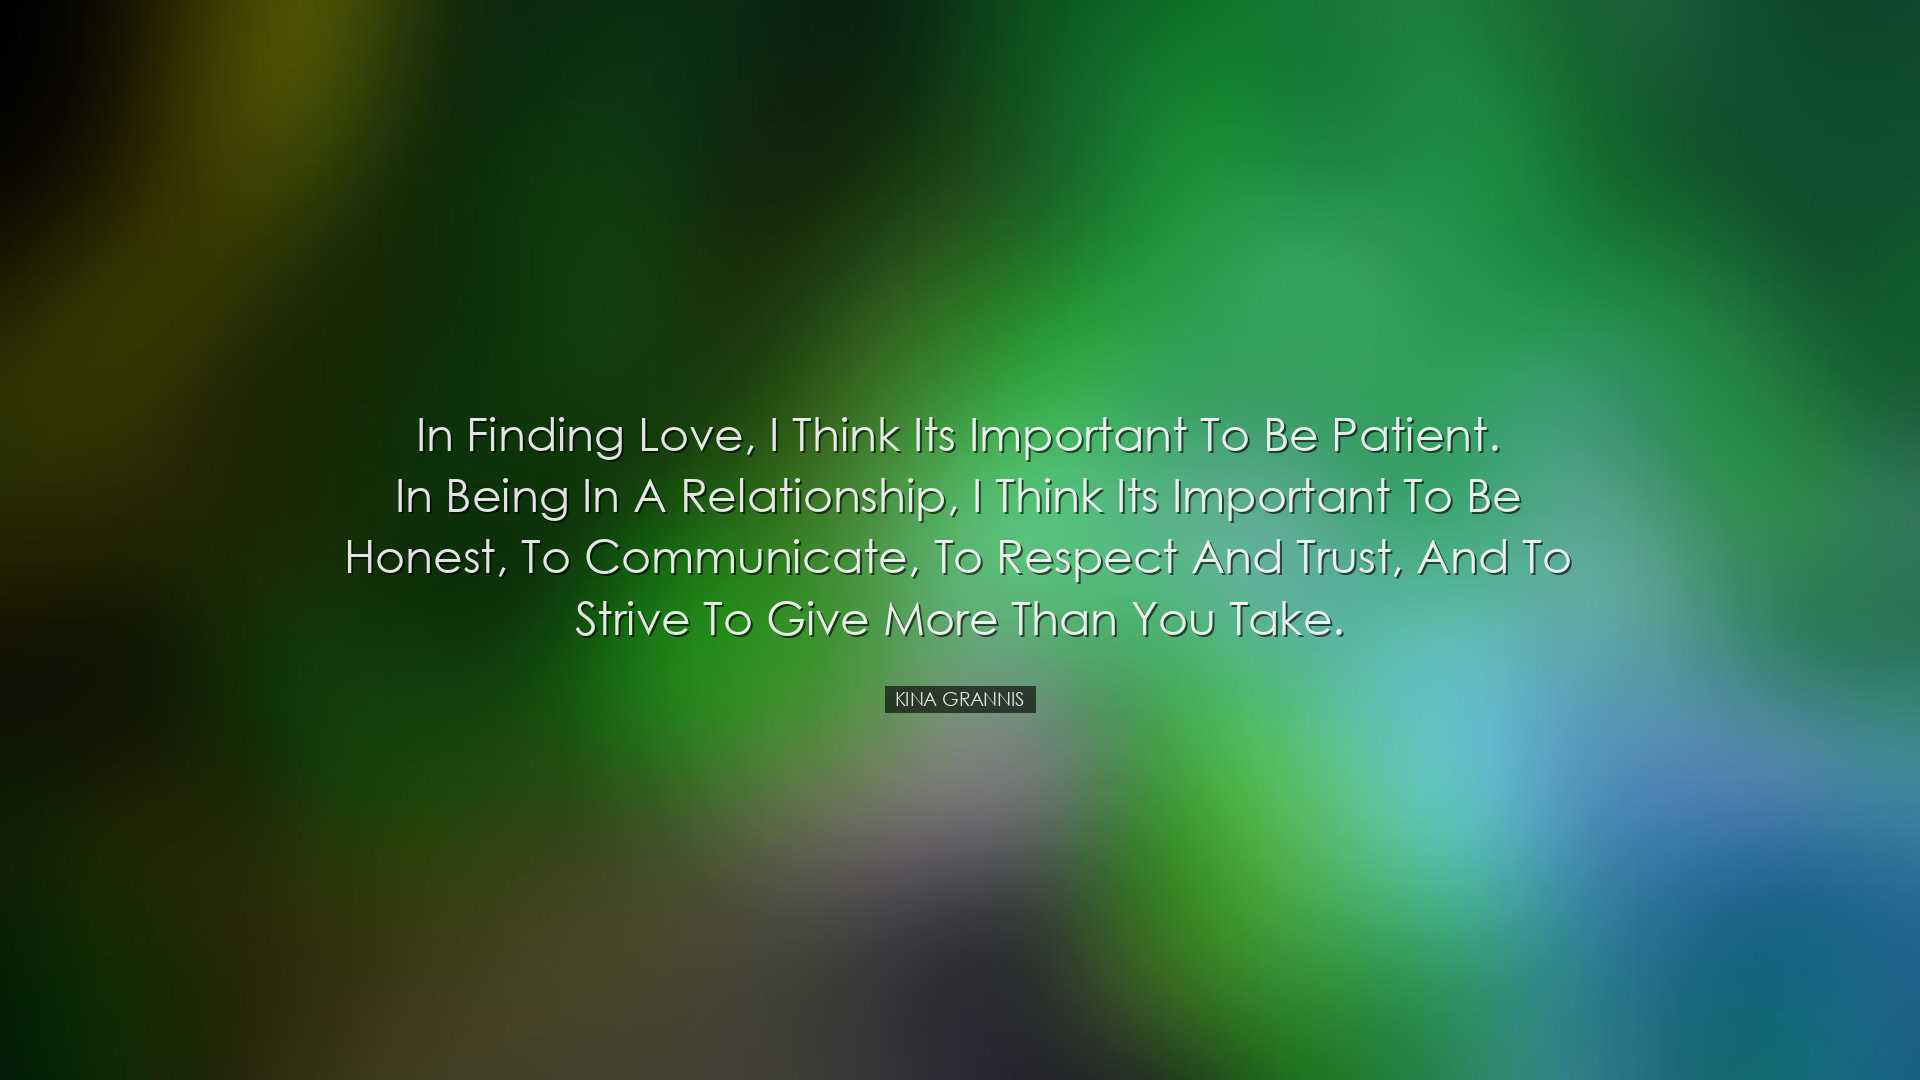 In finding love, I think its important to be patient. In being in